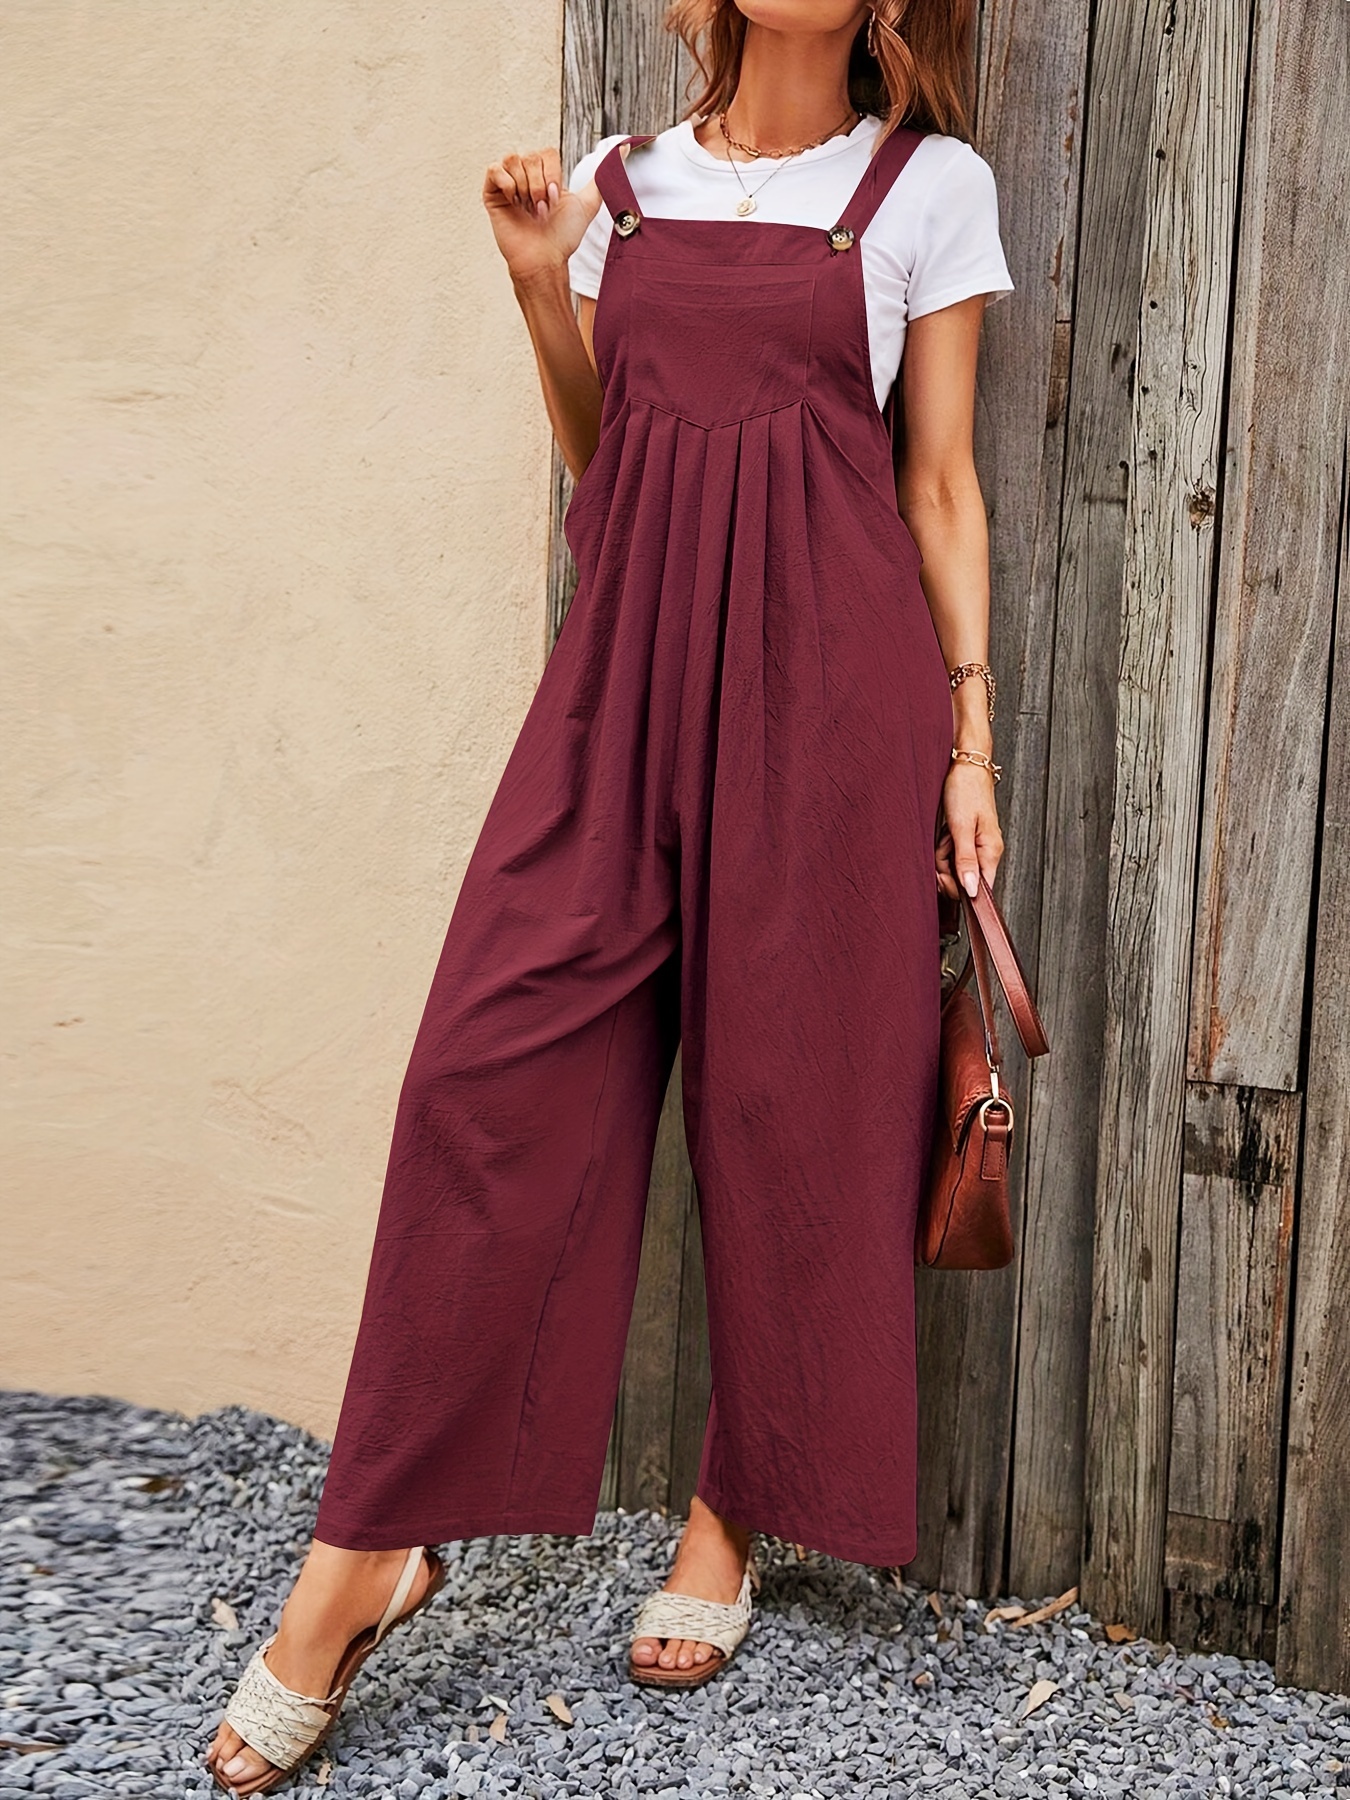 The Perfect Red Tall Girl Jumpsuit For Summer